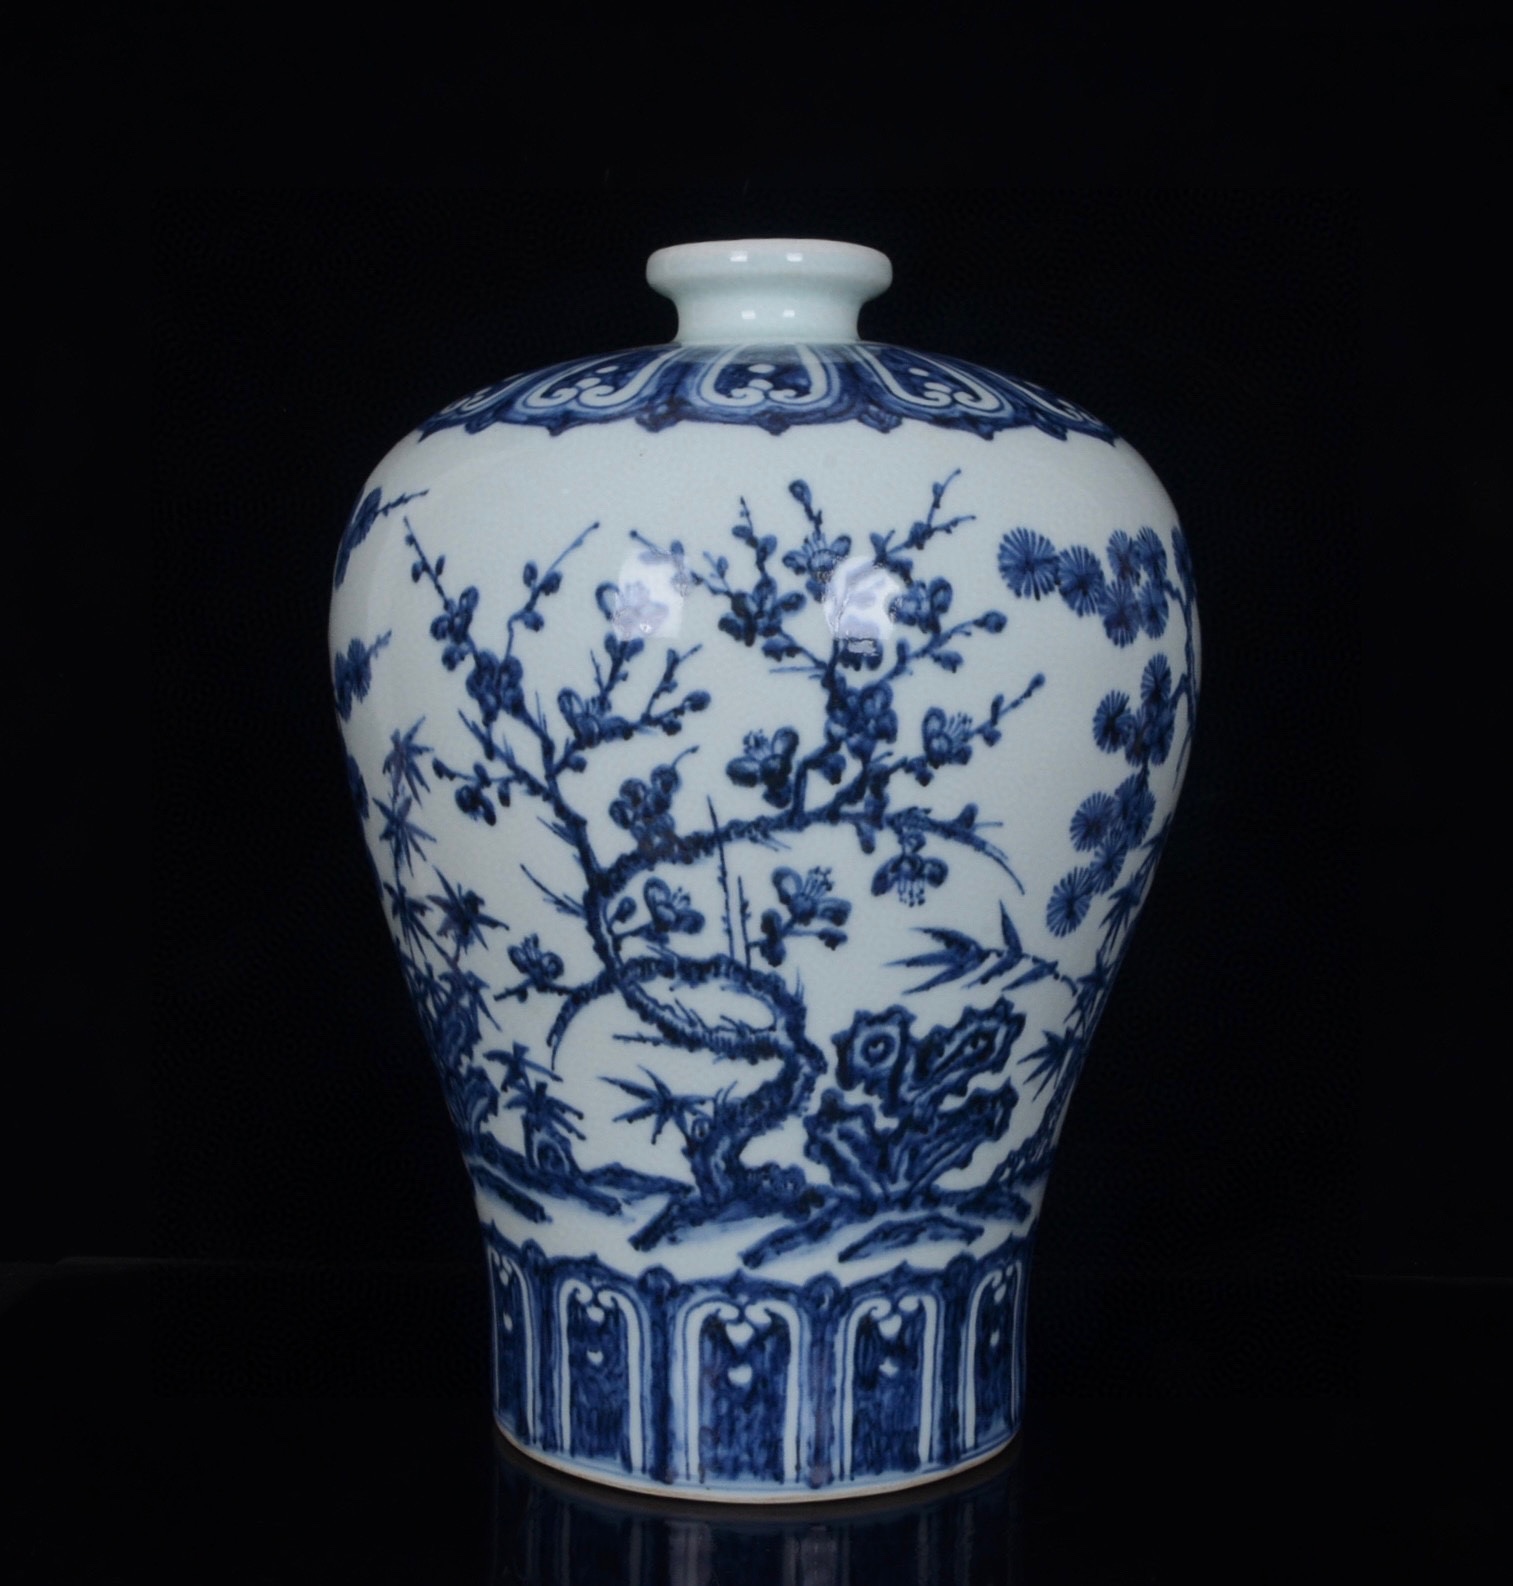 Ming dynasty blue and white plum vase with pine, bamboo and plum patterns - Image 3 of 9